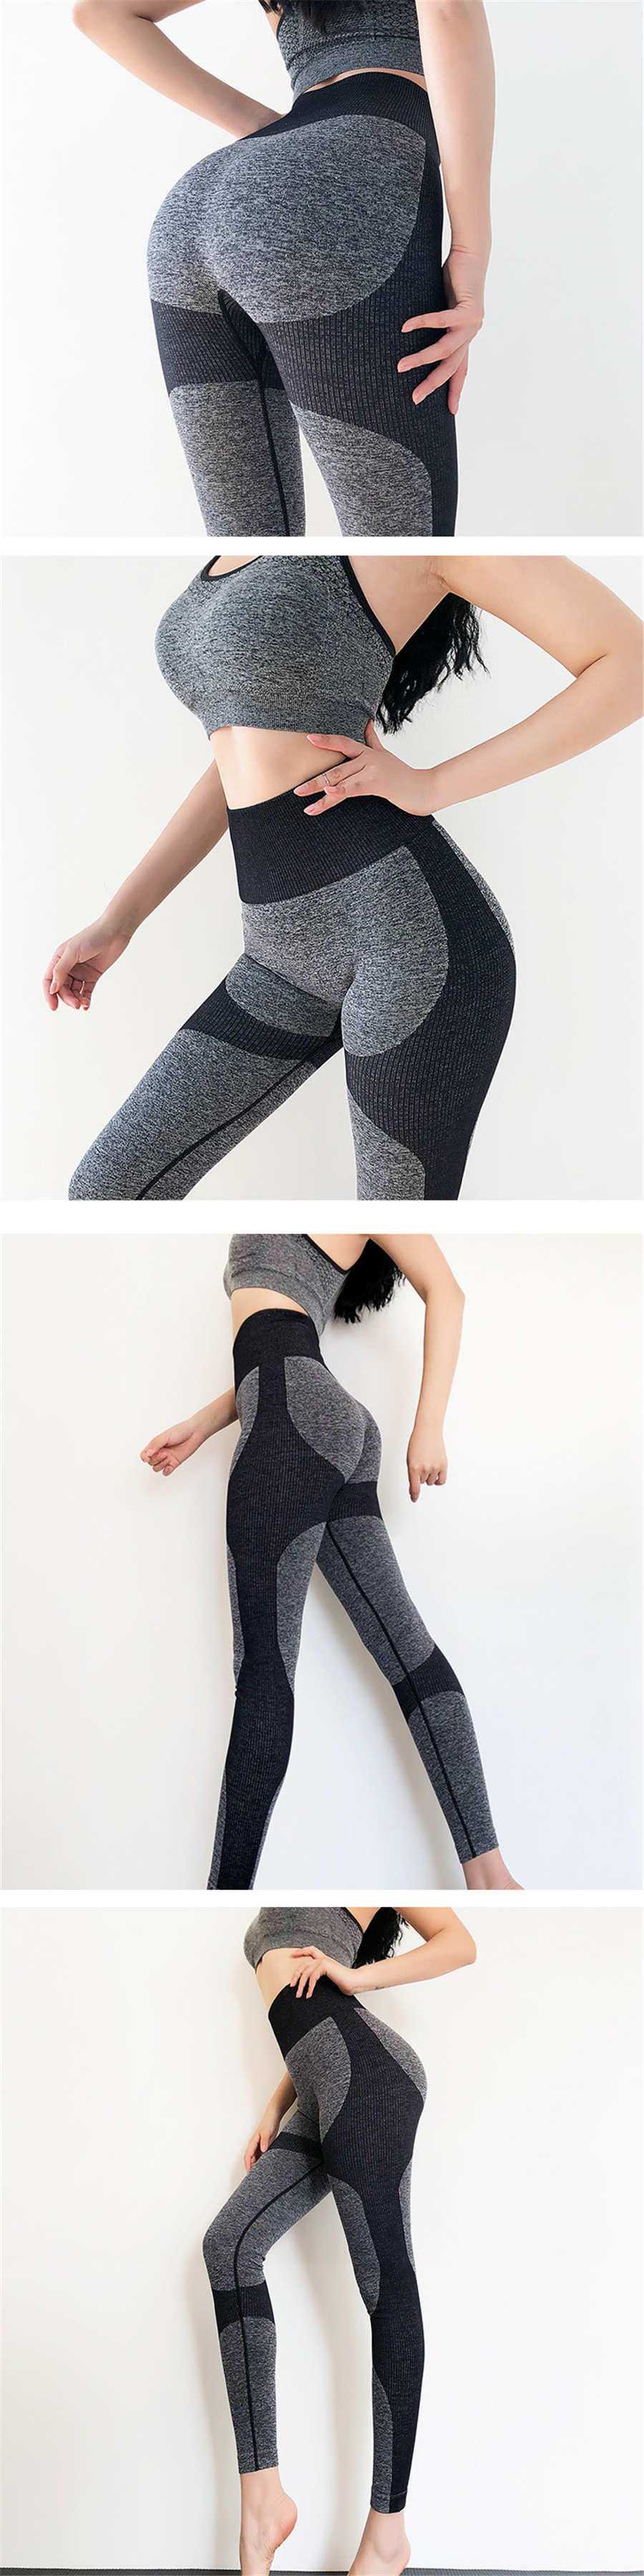 Seamless High Waist Seamless Yoga Tights For Women Tummy Control Drawstring  Leggings For Gym, Running, And Fitness Training From I_show, $6.67